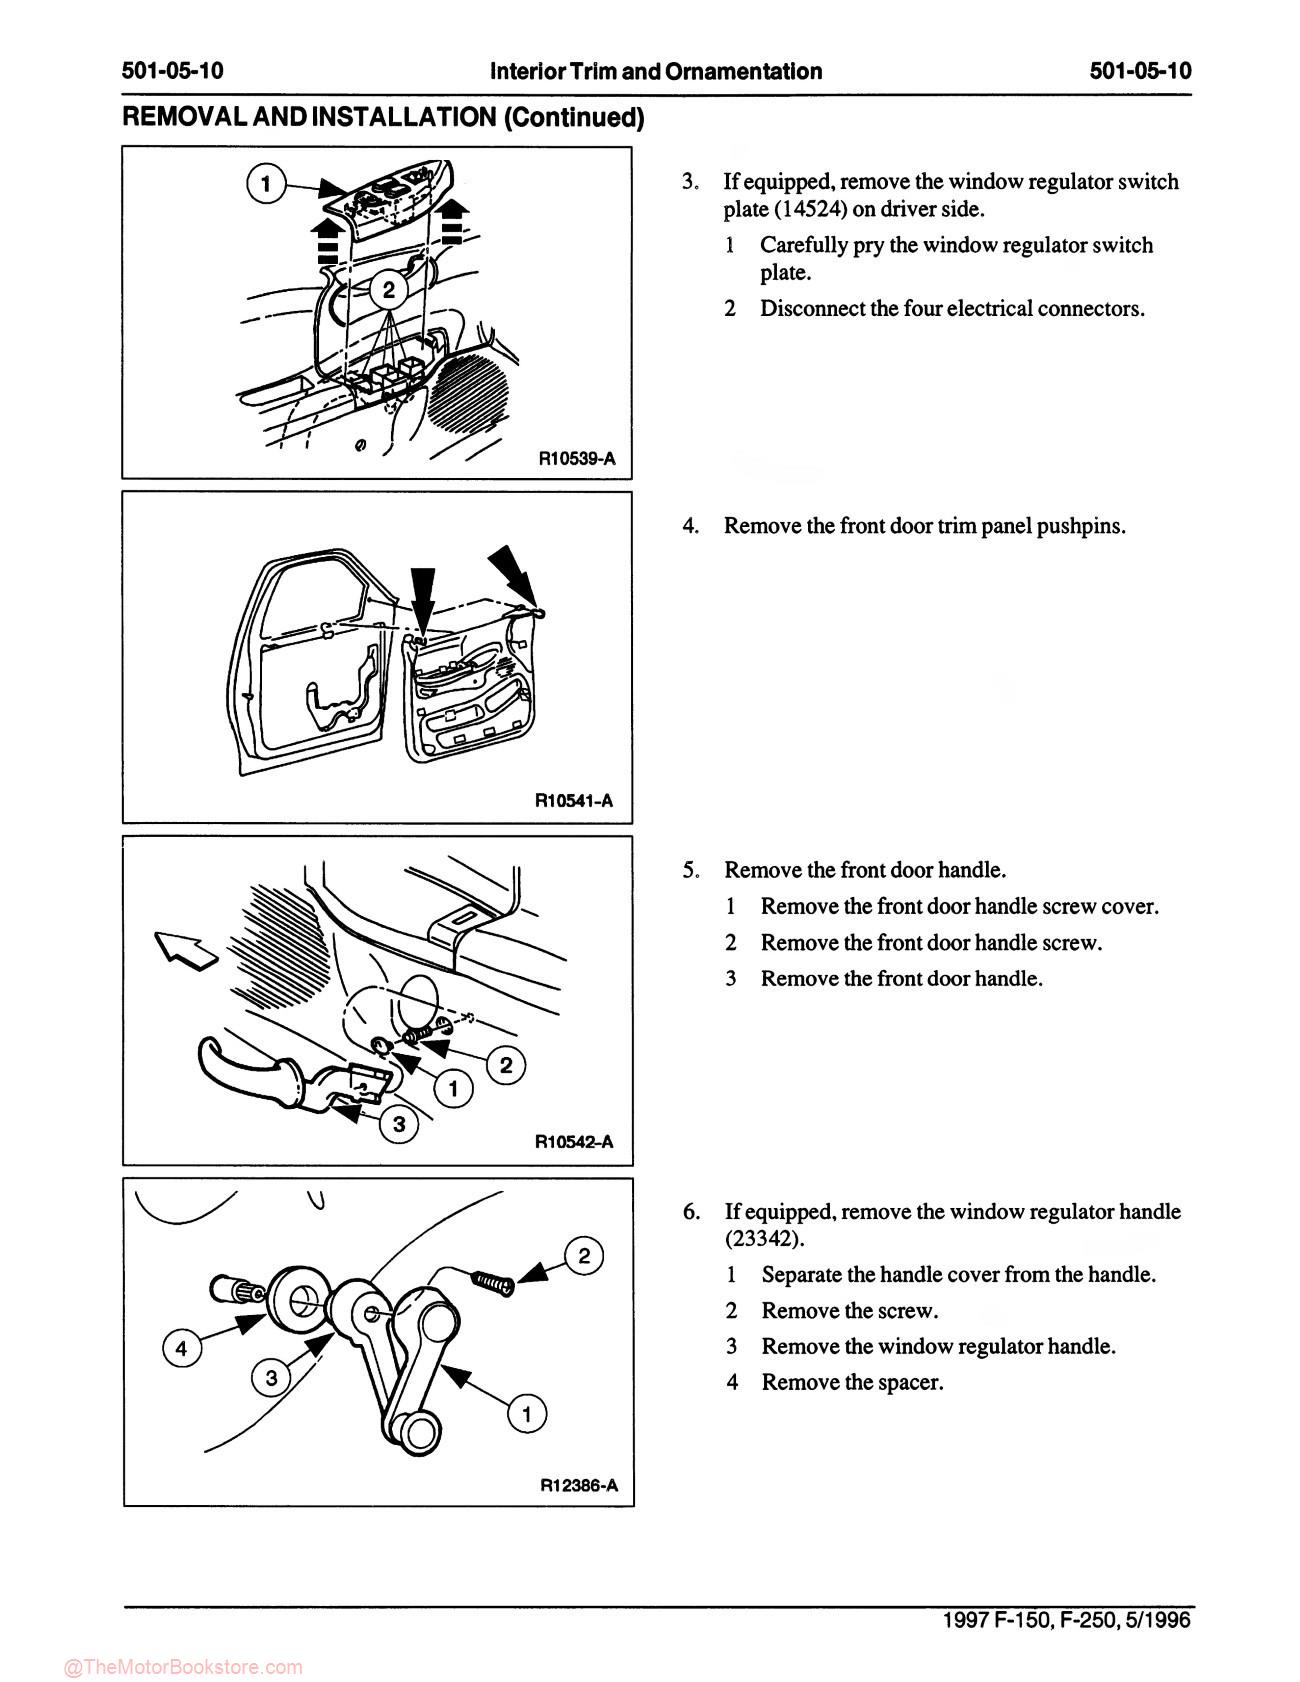 1997 Ford F-150, F-250 Truck Service Manual - Sample Page 5